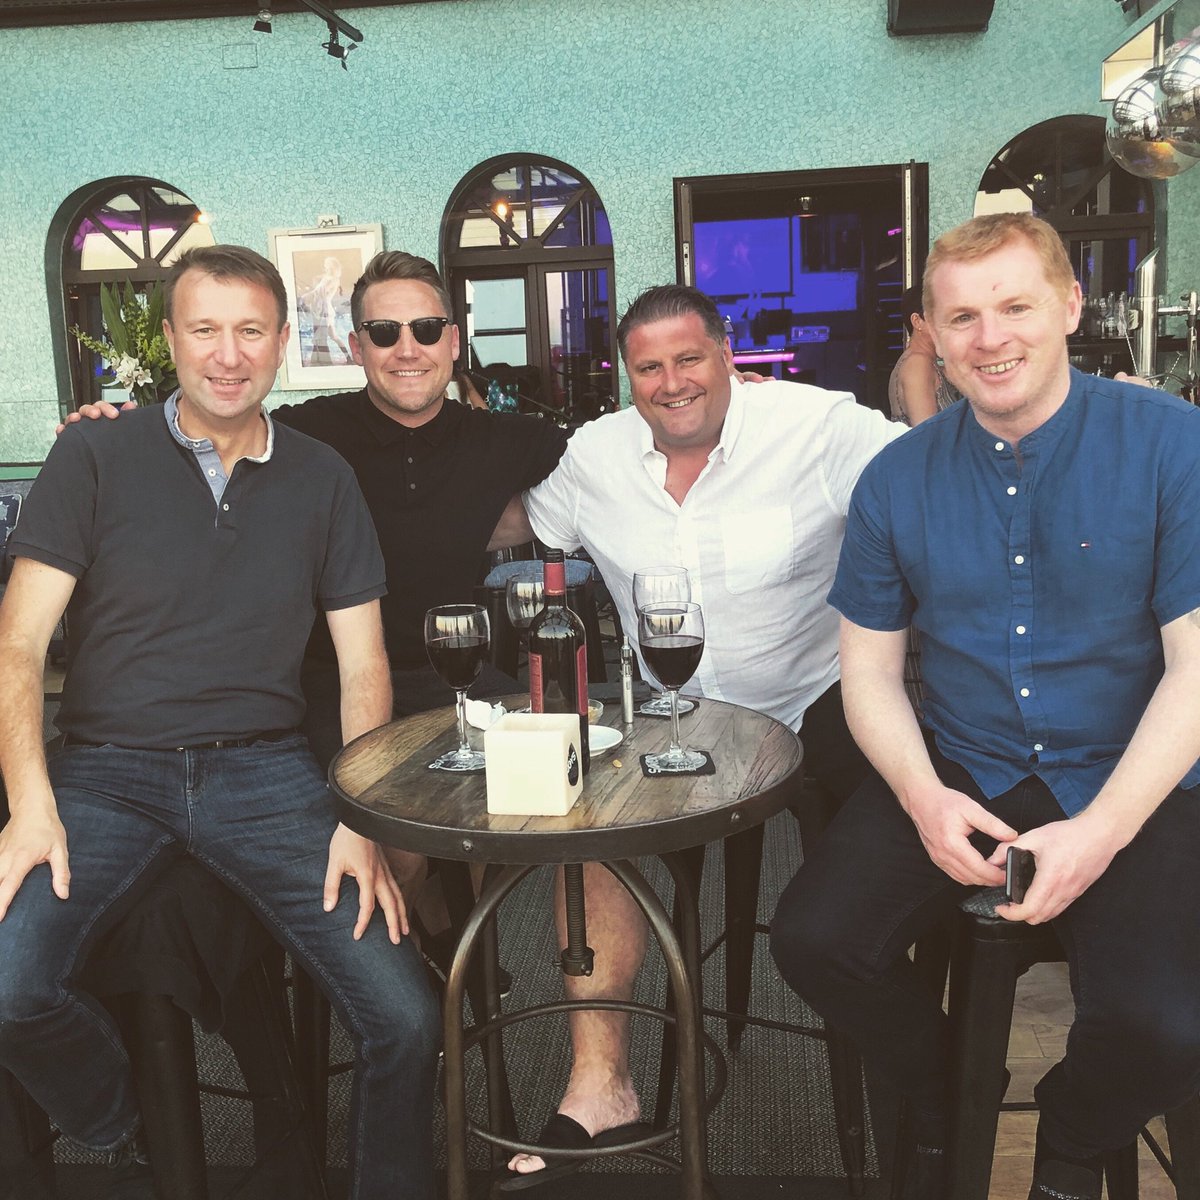 Been some trip with these guys this last couple days in Marbella. Agent to the stars @martinjreilly69 the former Mayor of Kinsale @scobie51301677 and of course the gaffa